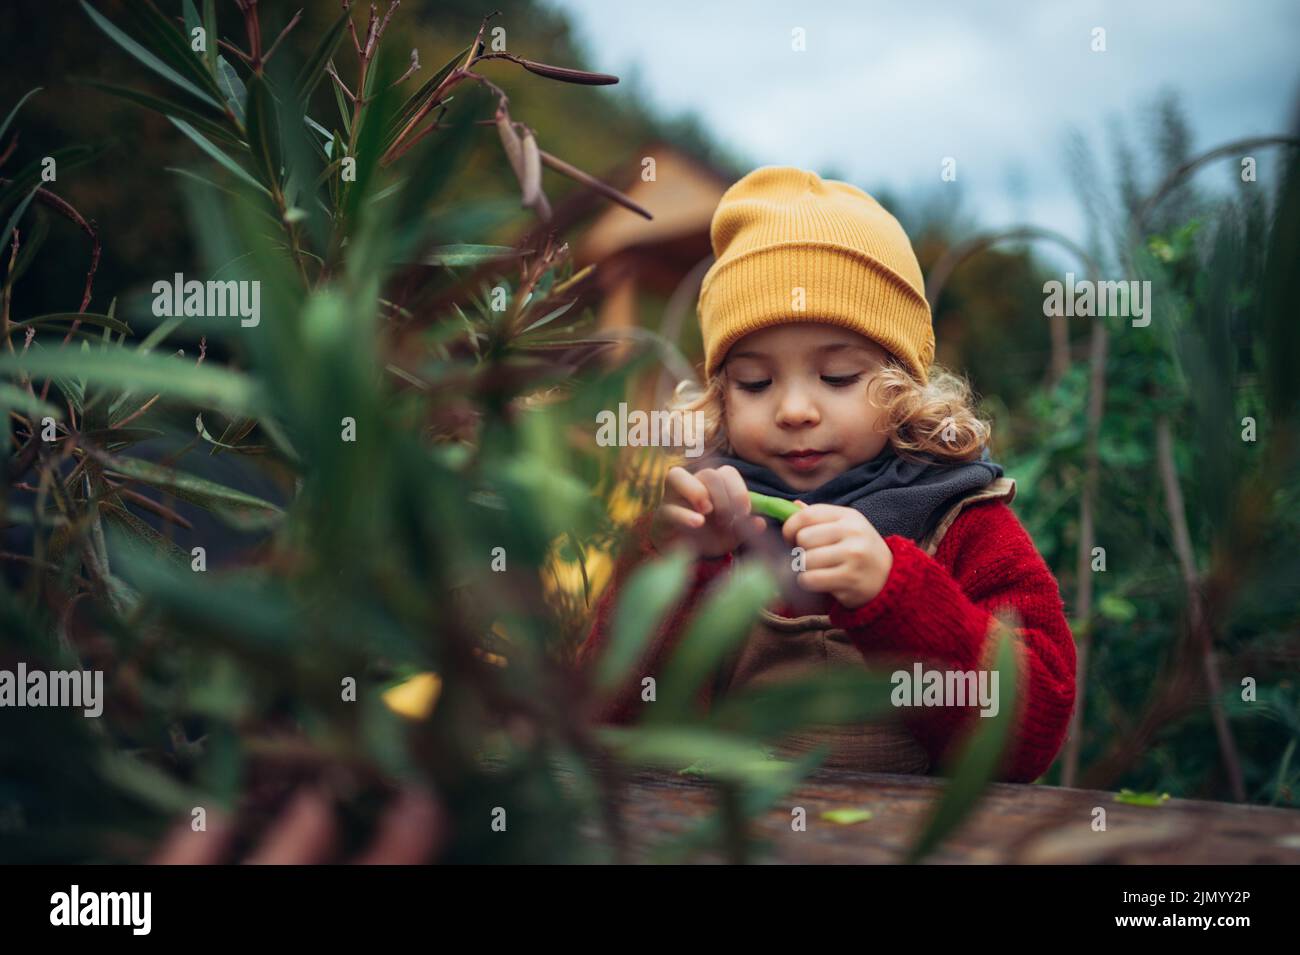 Little girl in autumn clothes eating harvested organic peas in eco garden, sustainable lifestyle. Stock Photo